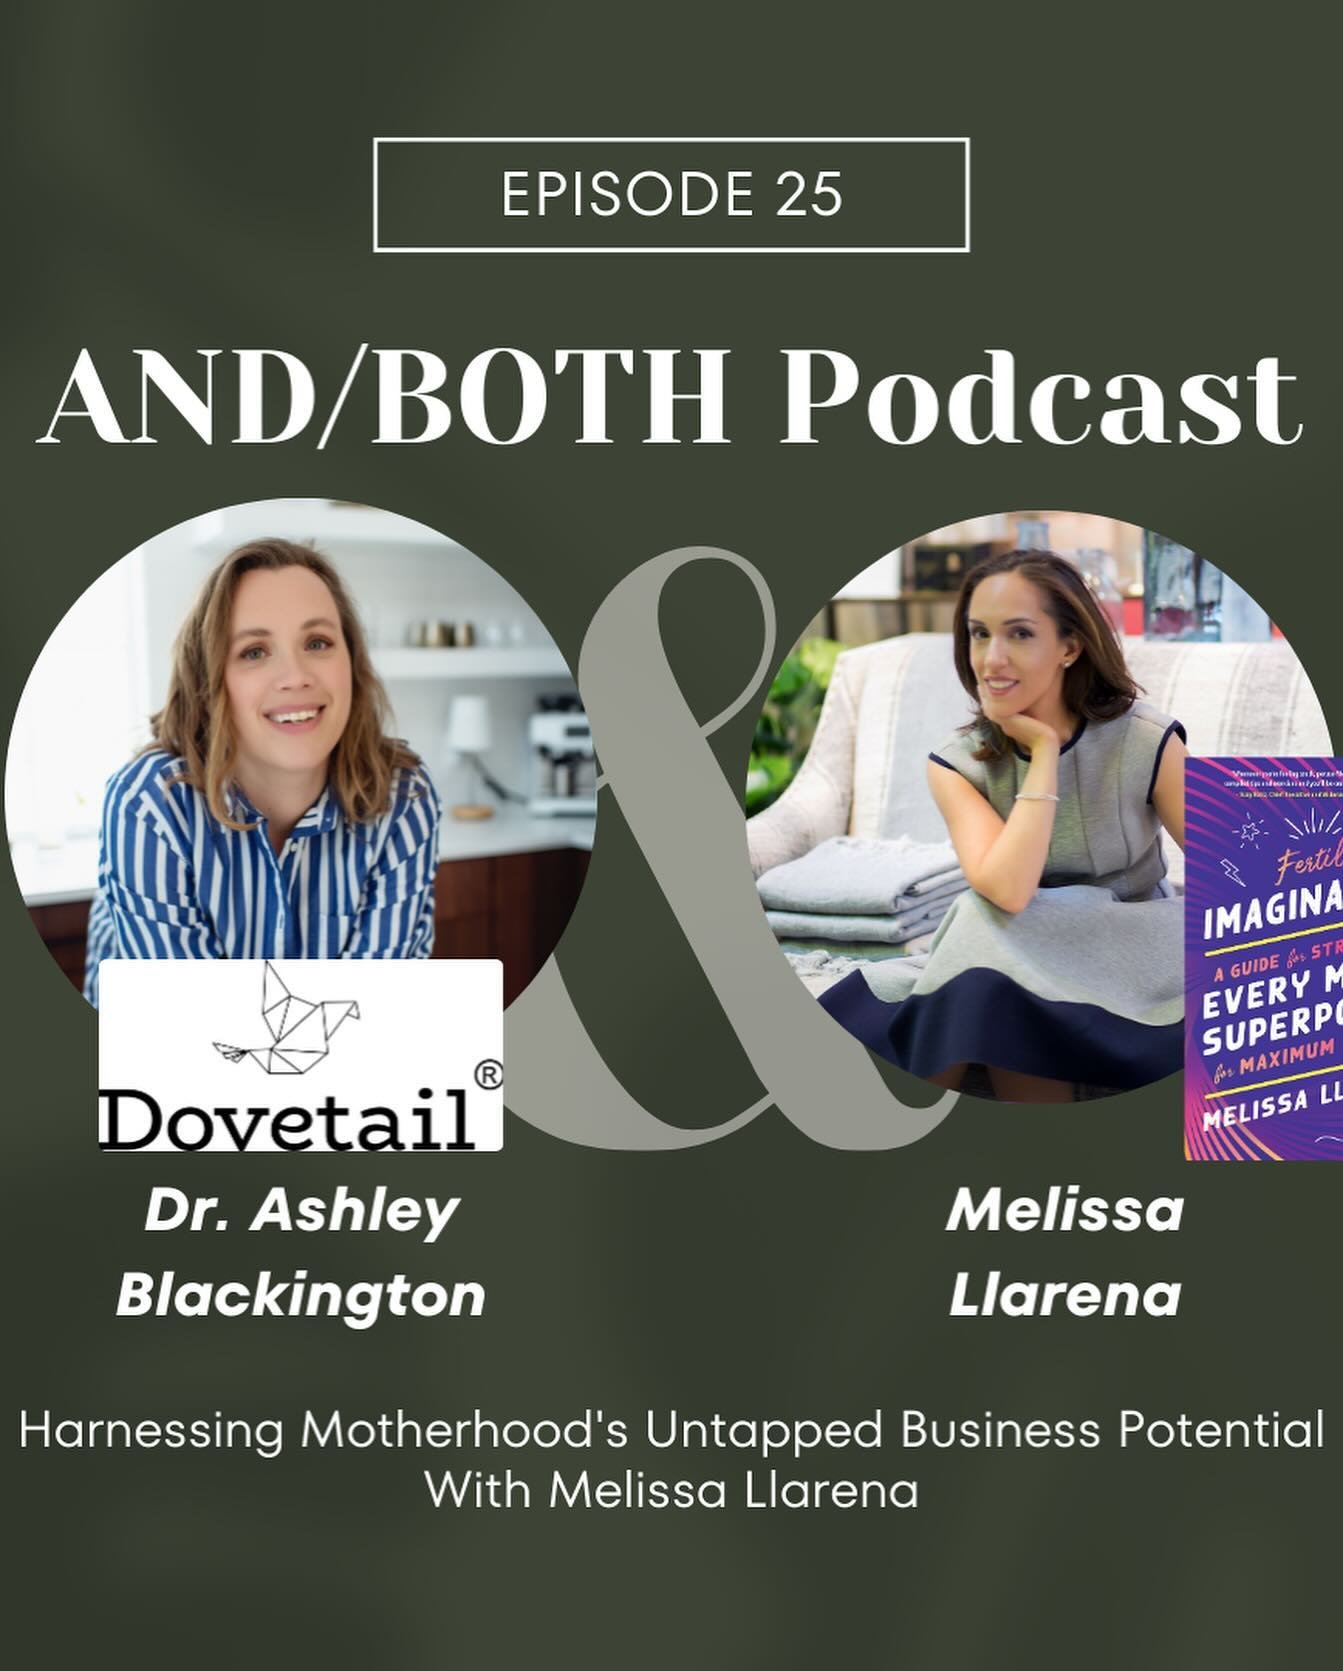 New episode Friday!

This week Melissa Llarena joins me in the studio to talk about motherhood and entrepreneurship- and how they have more in common than you may think! I love when people bring new perspective to the mix, to challenge some of the ru